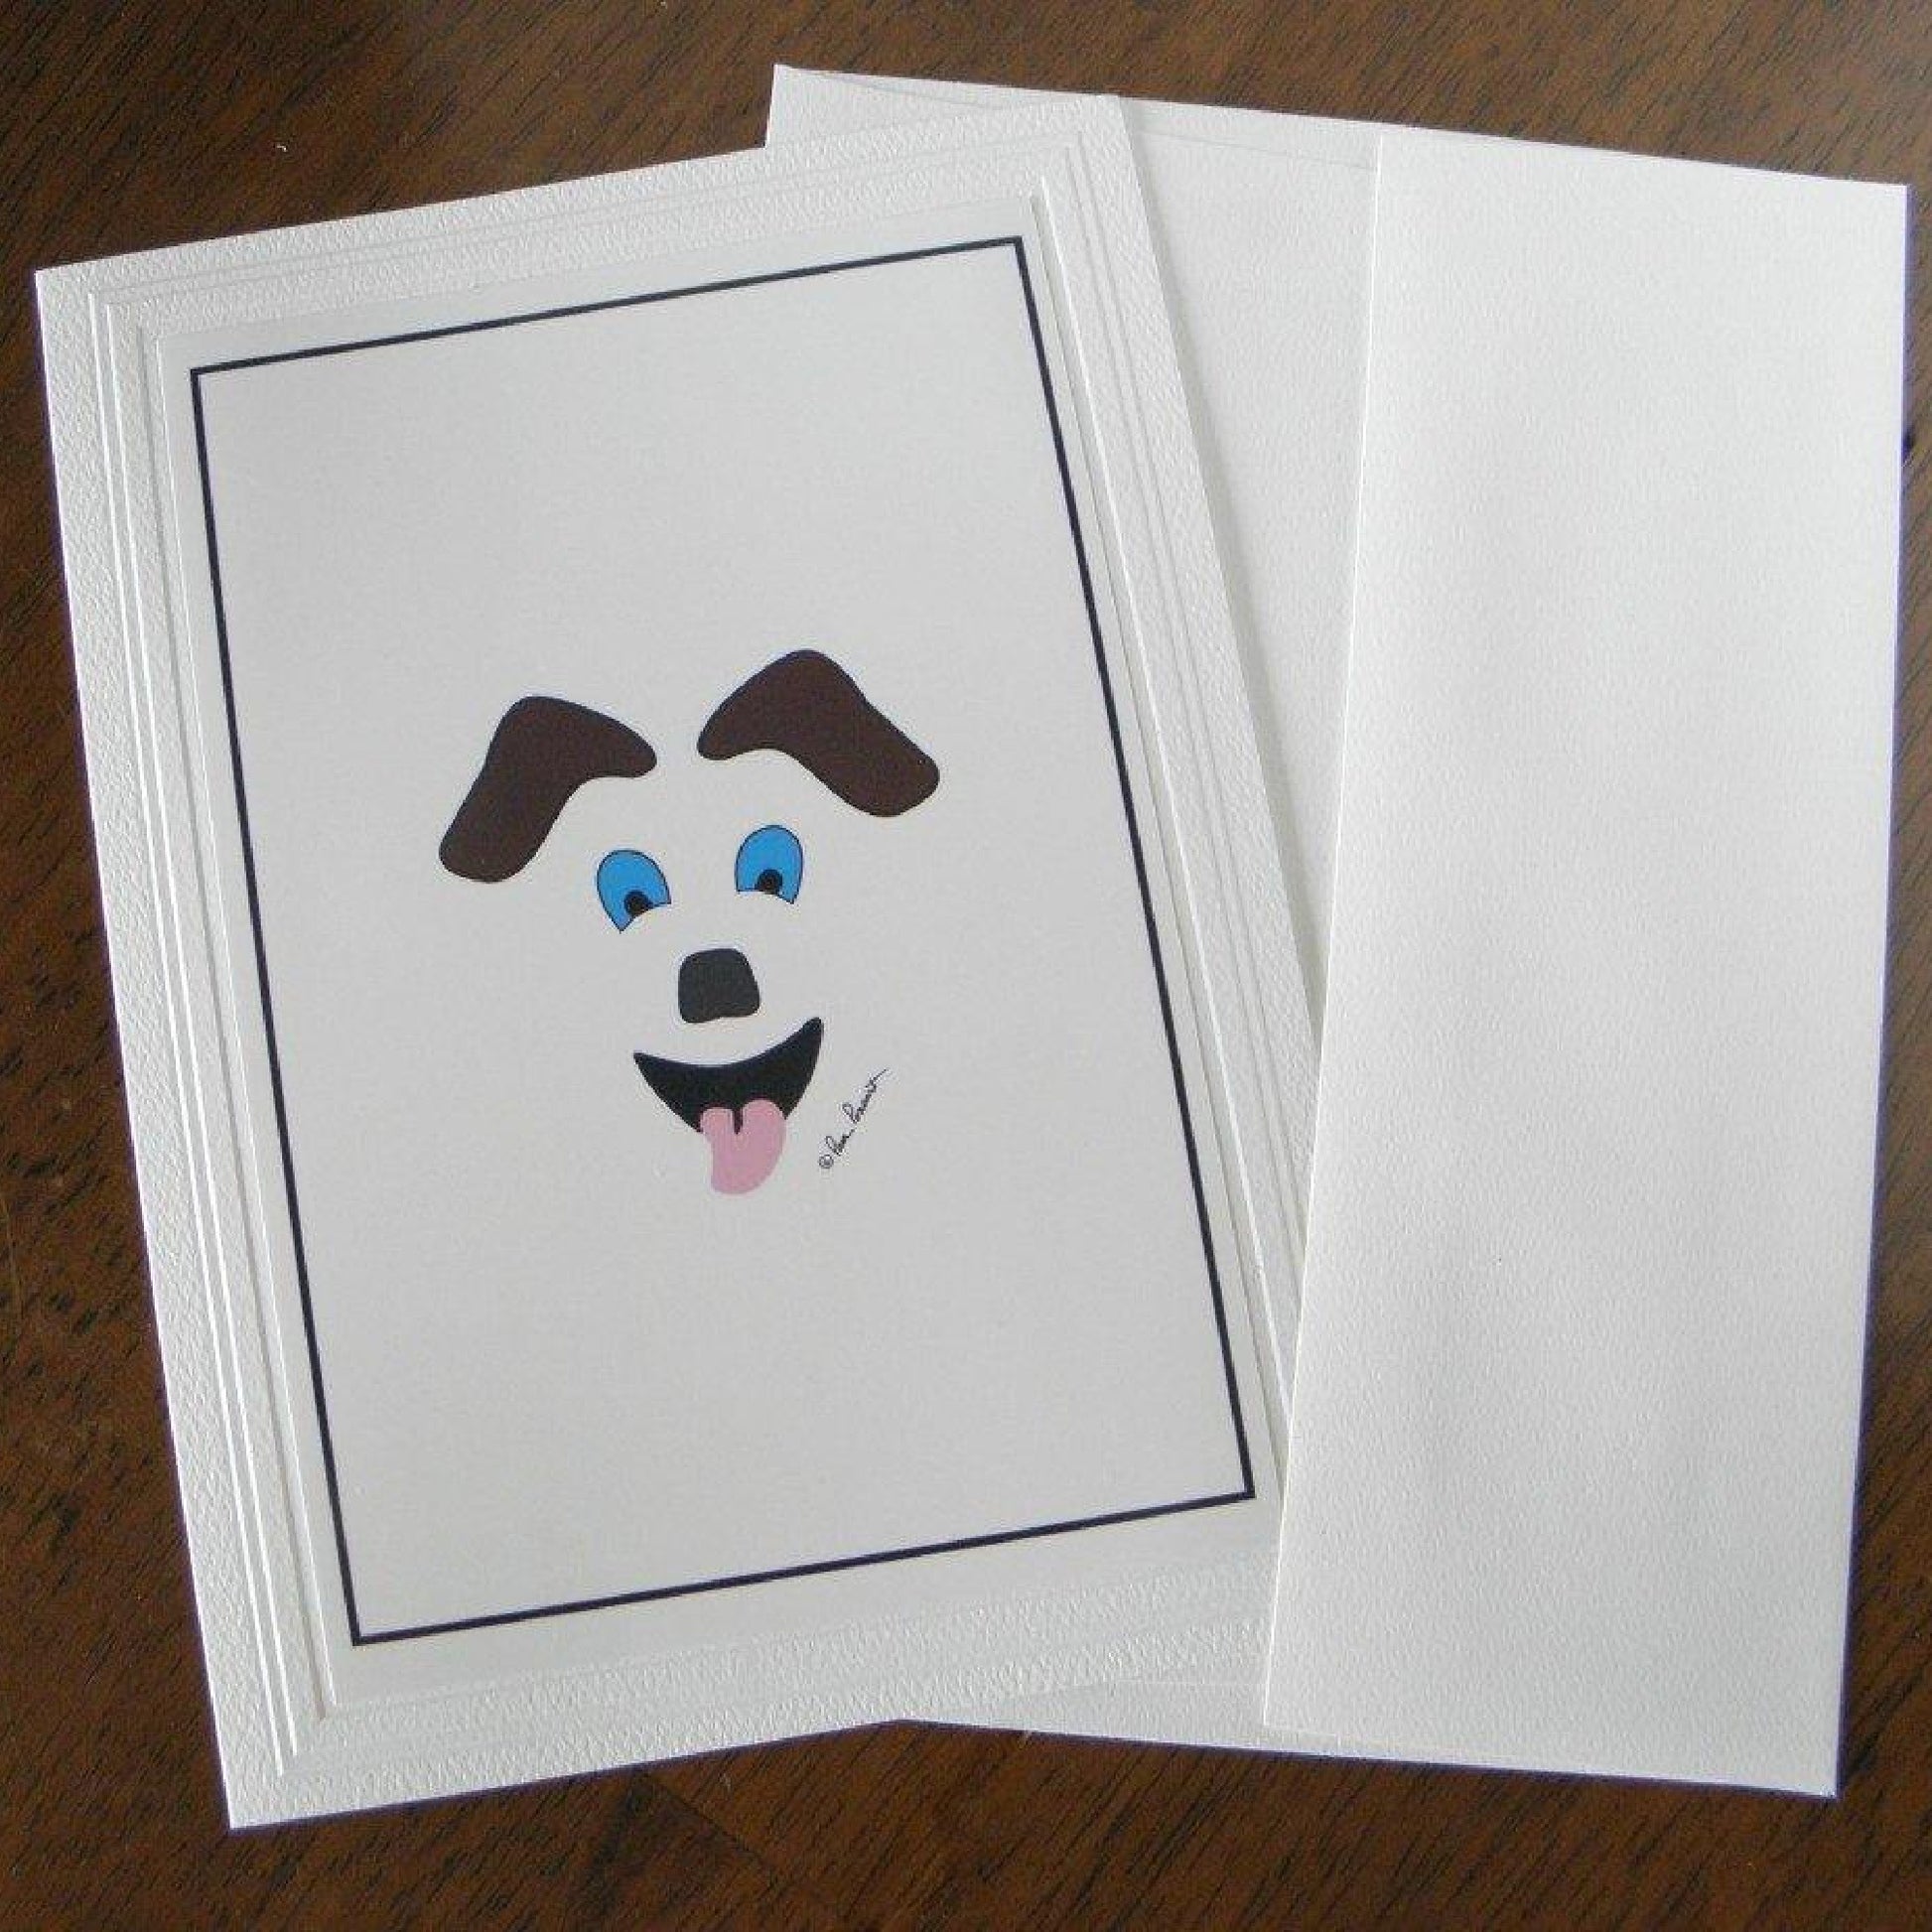 Font view with our Dog-Art Greeting Card and envelope